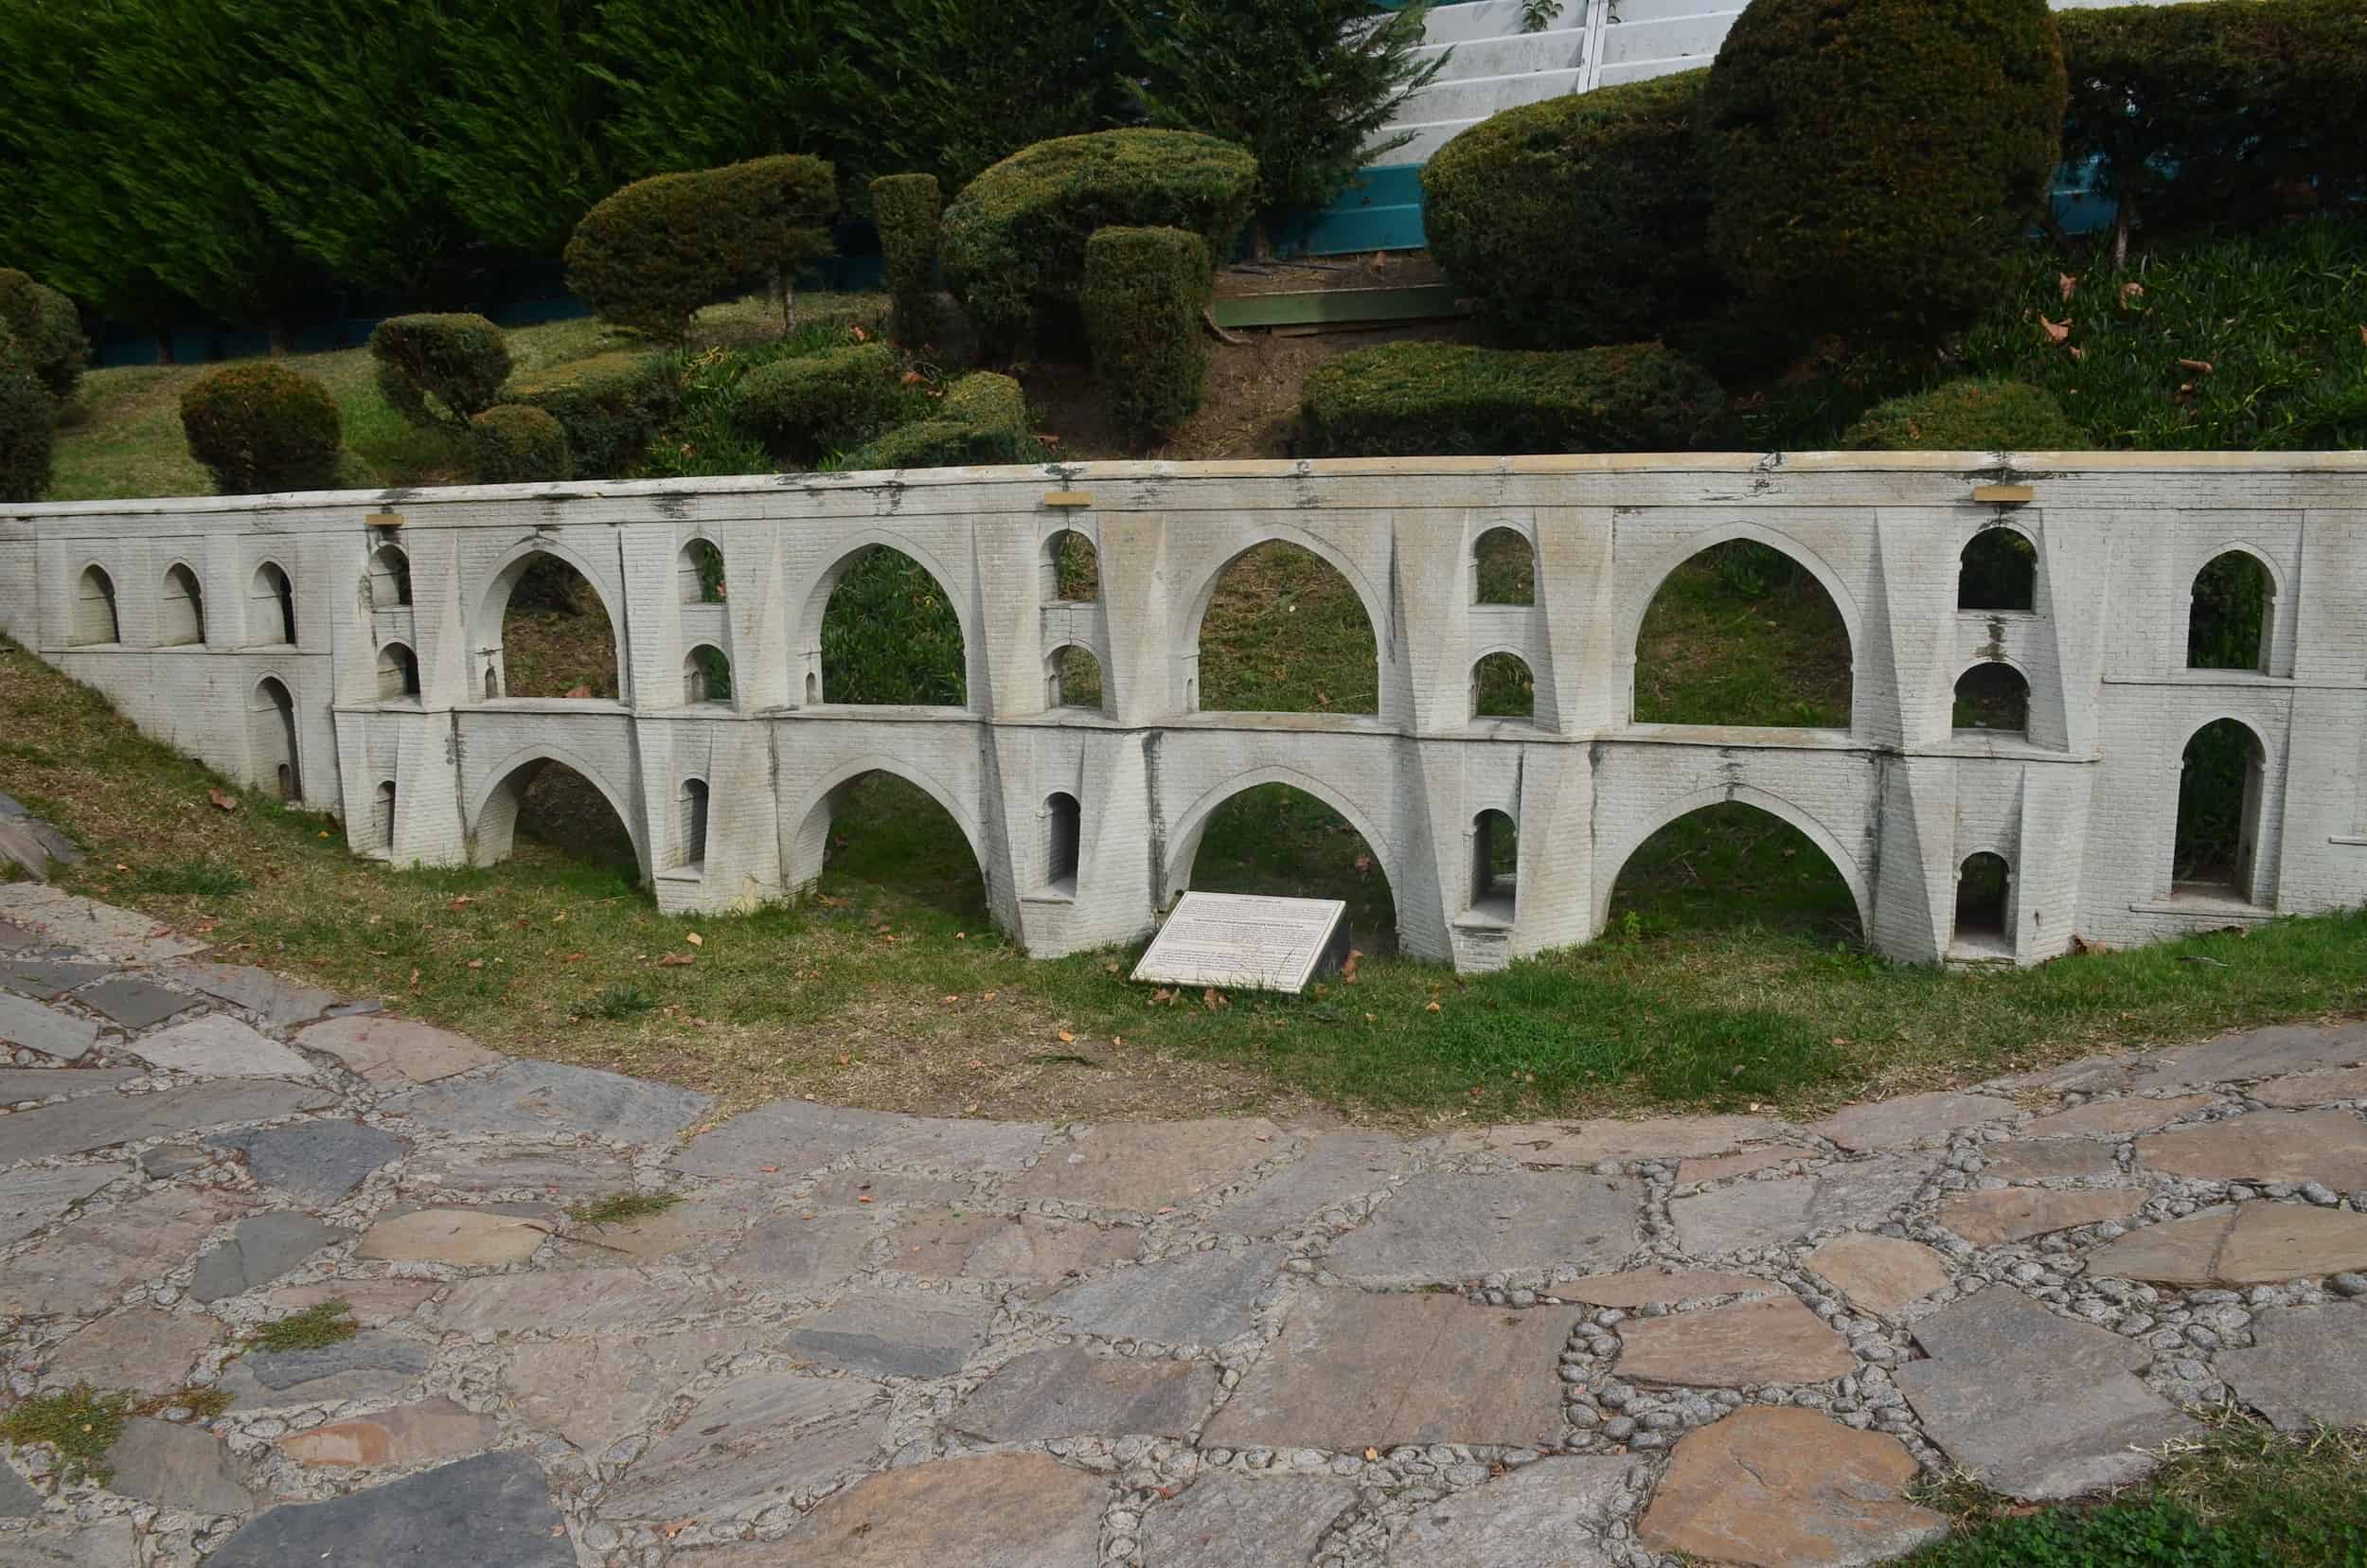 Model of the 40 Fountains Aqueduct System, 16th century